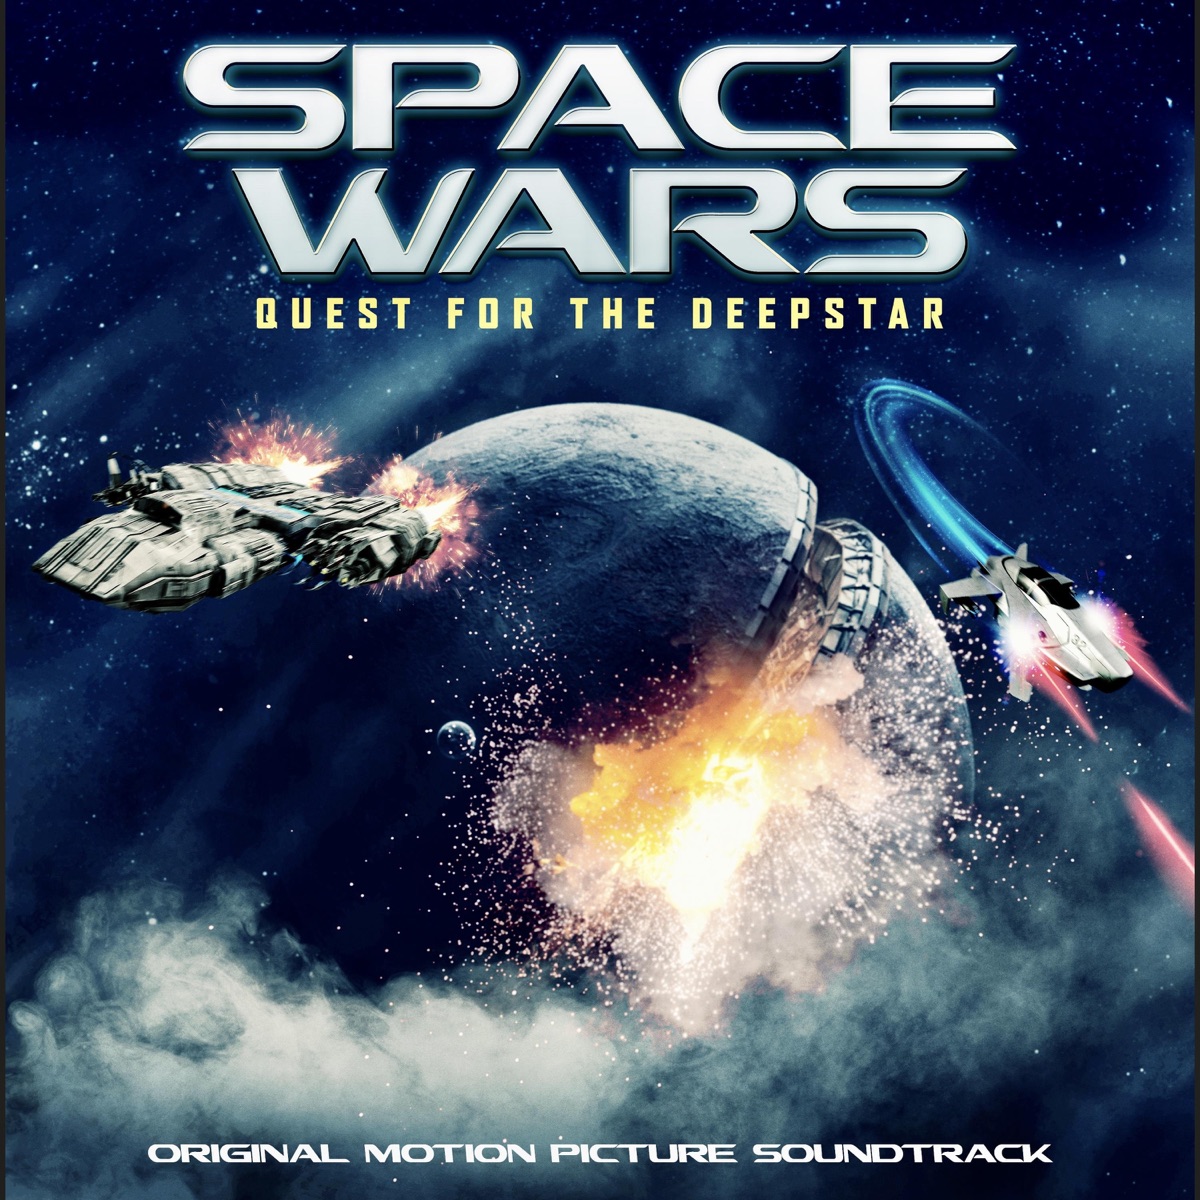 Space Wars: Quest for the Deepstar (Original Motion Picture Soundtrack) -  Album by Joel Christian Goffin - Apple Music